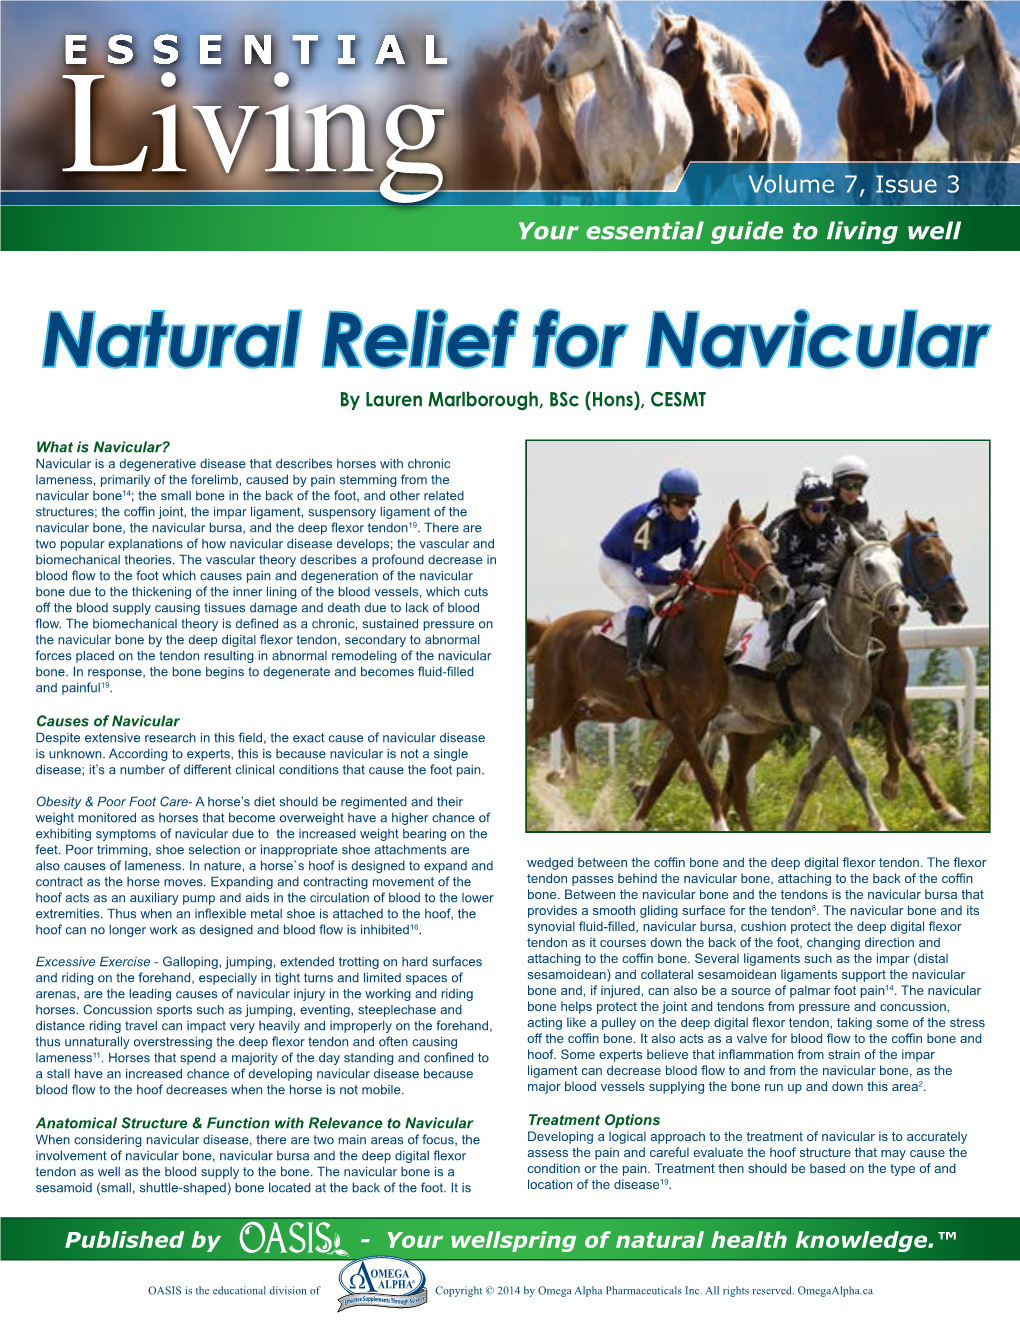 Natural Relief for Navicular